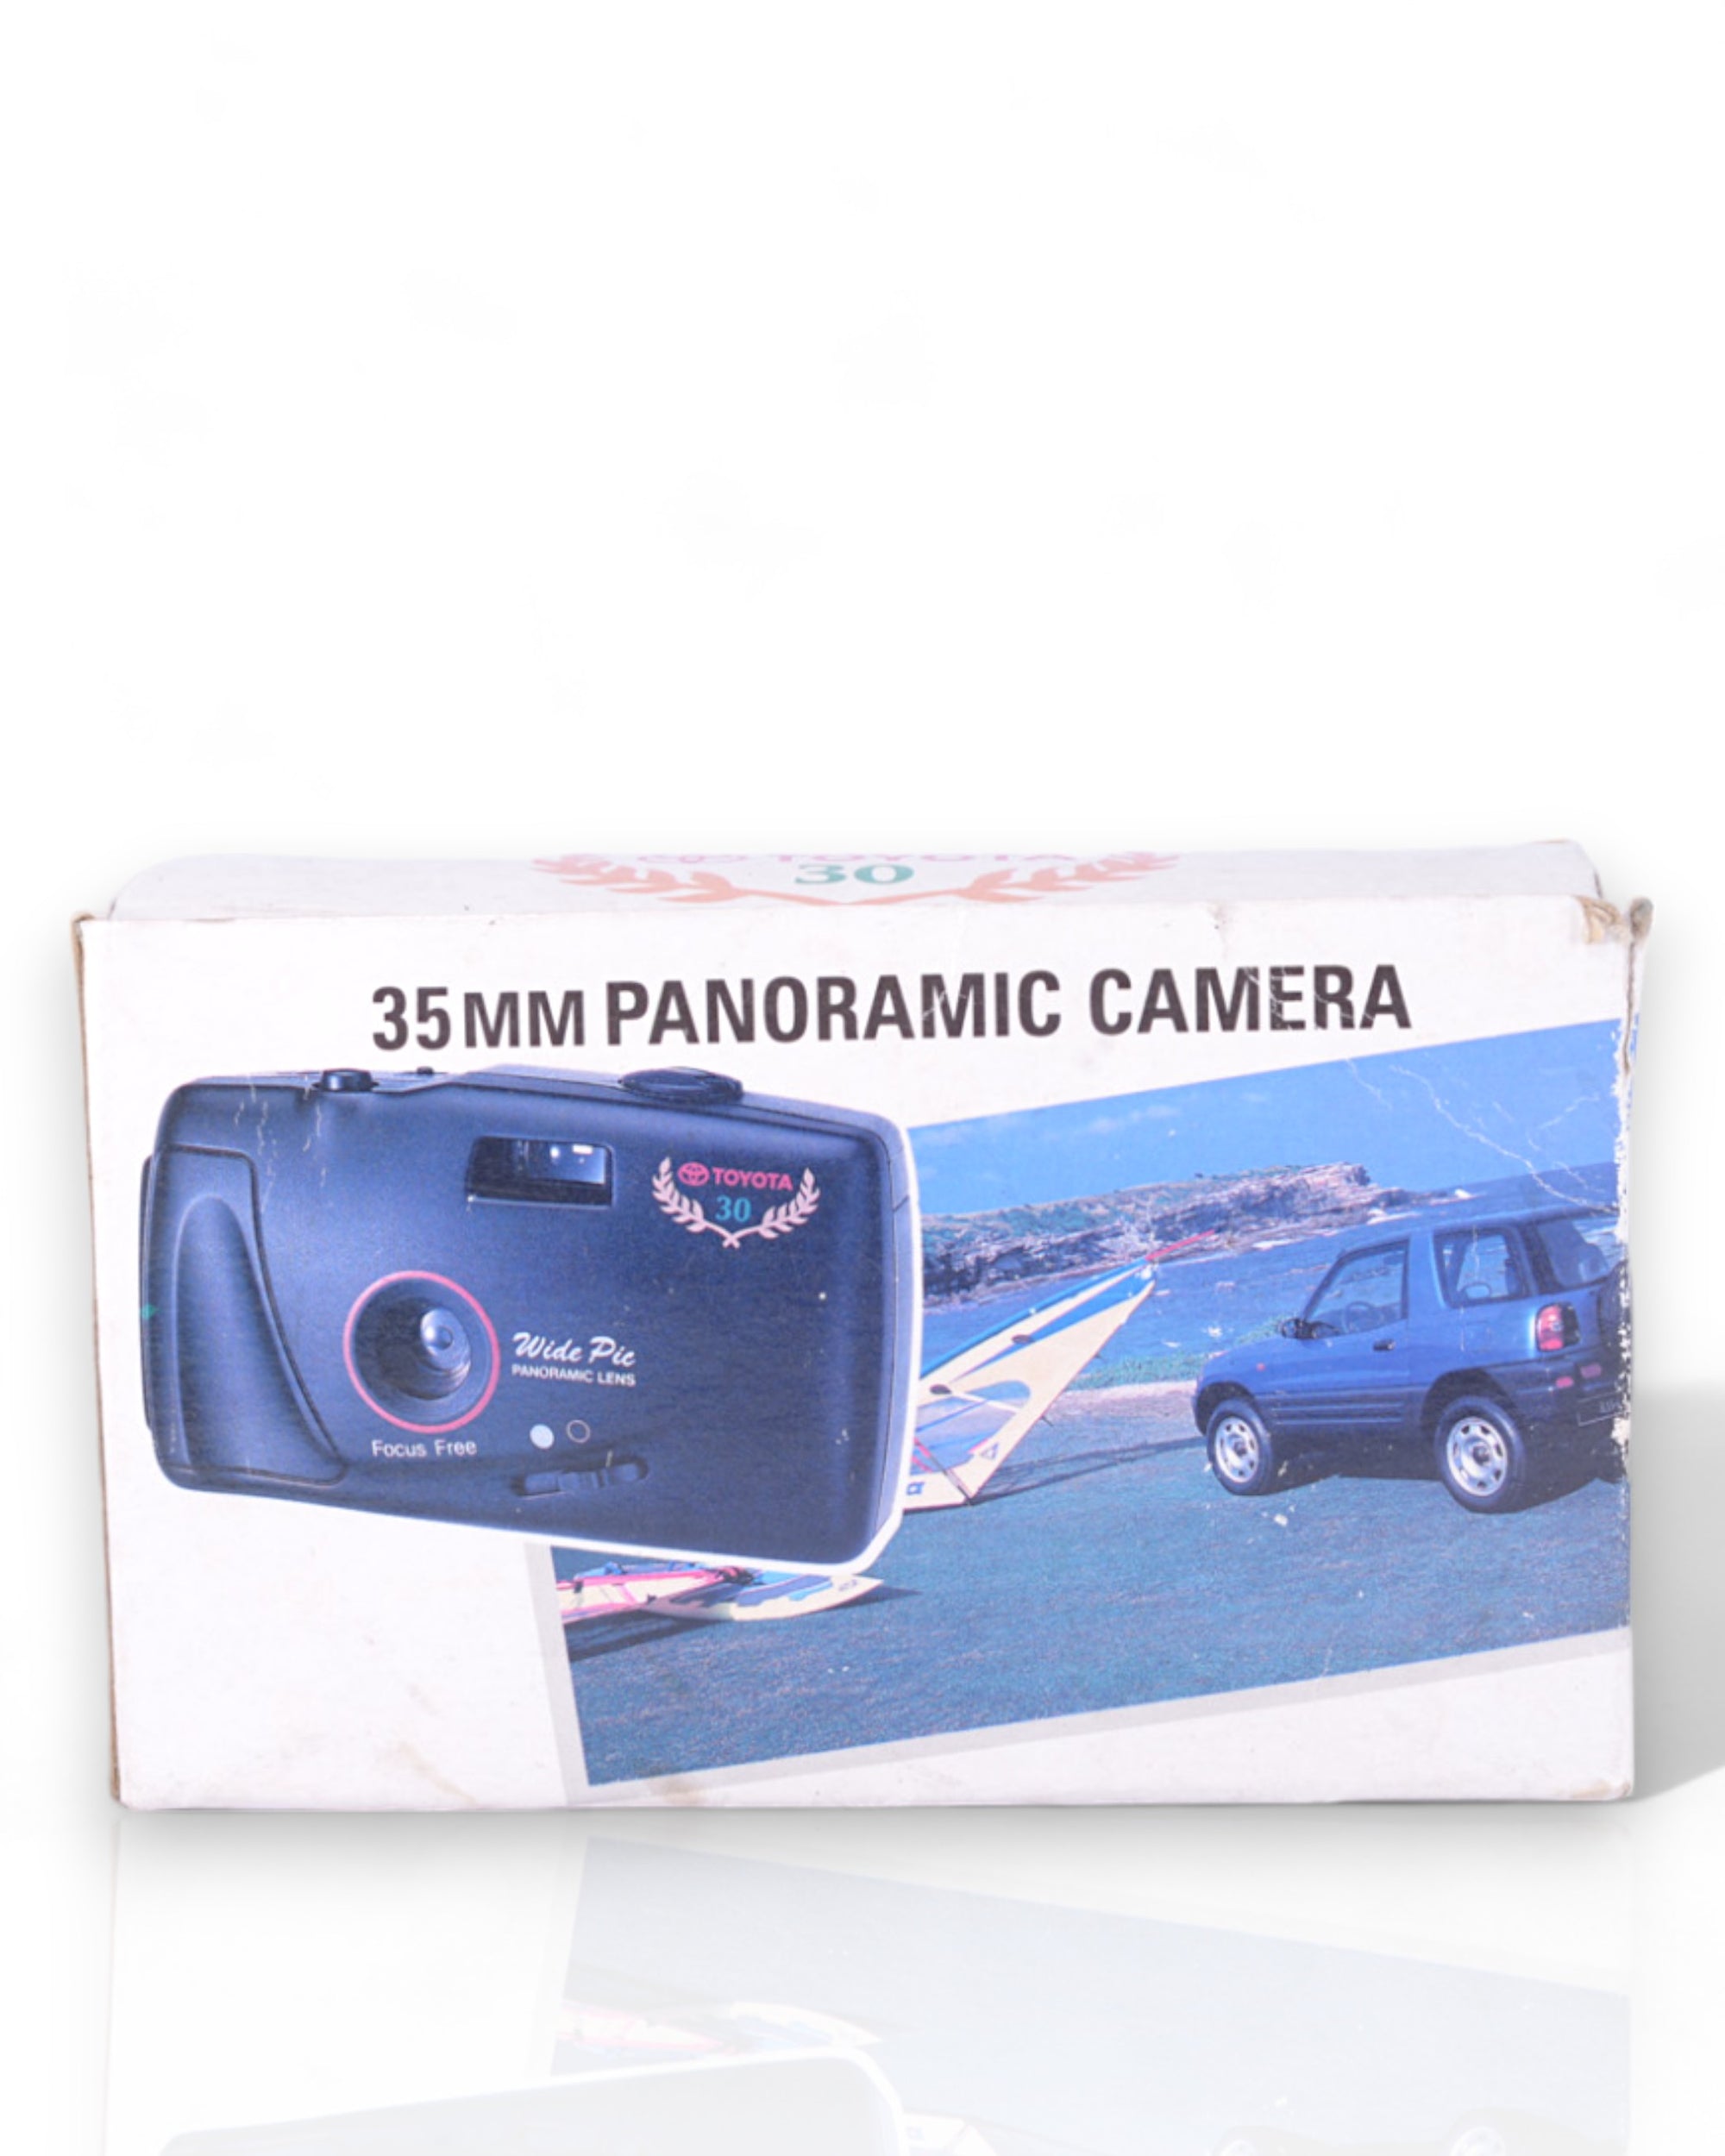 Wide Pic 35mm Panoramic Point & Shoot film camera with 35mm lens